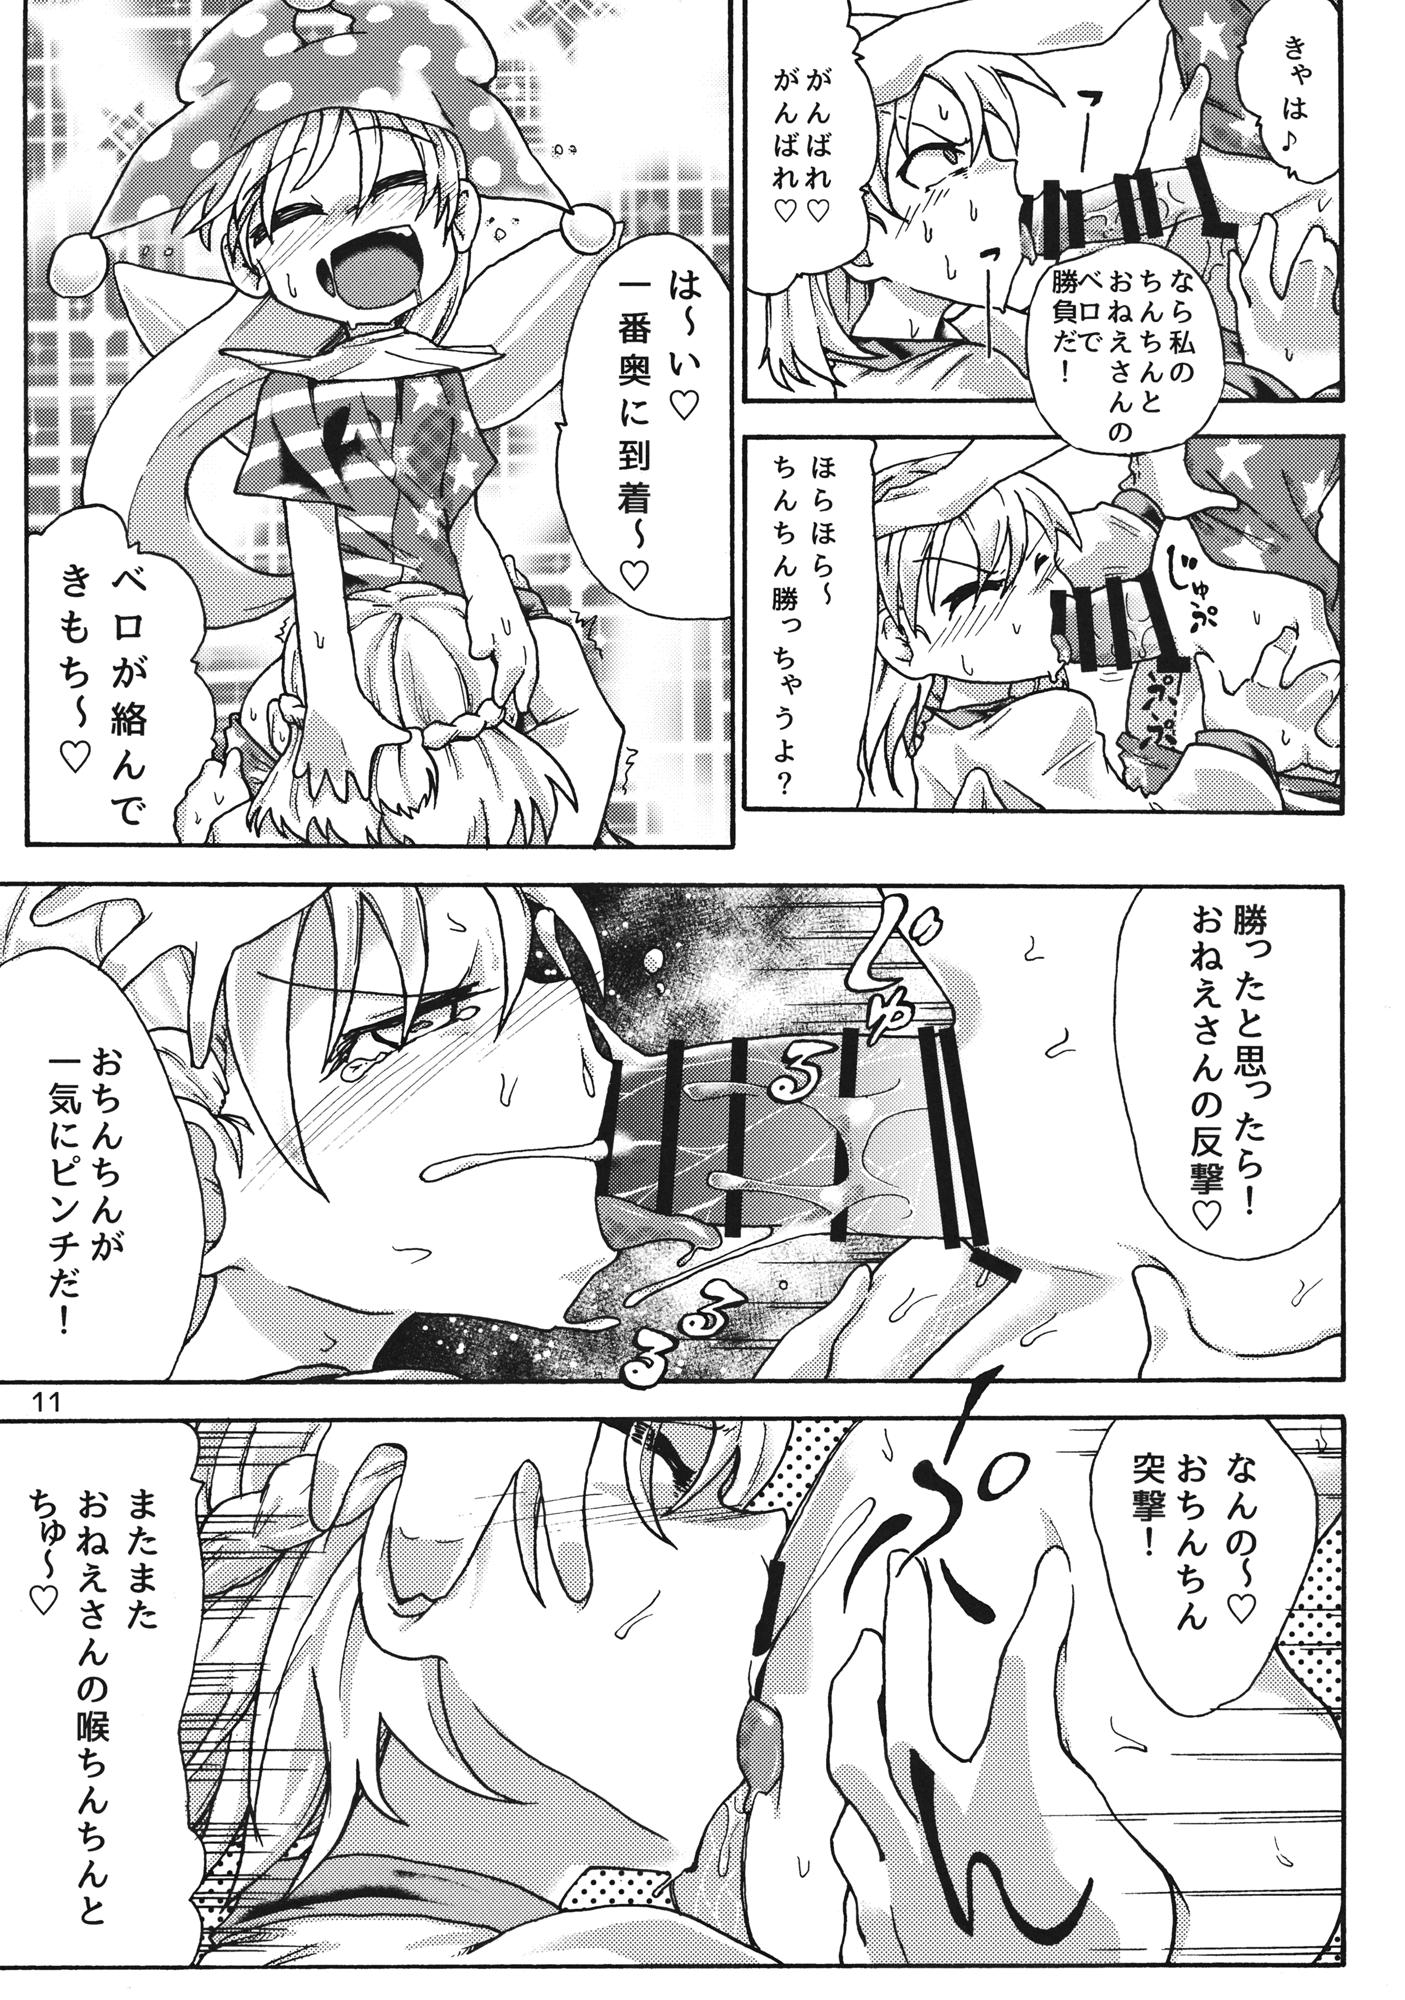 Stripper Creeping! - Touhou project Daring - Page 10